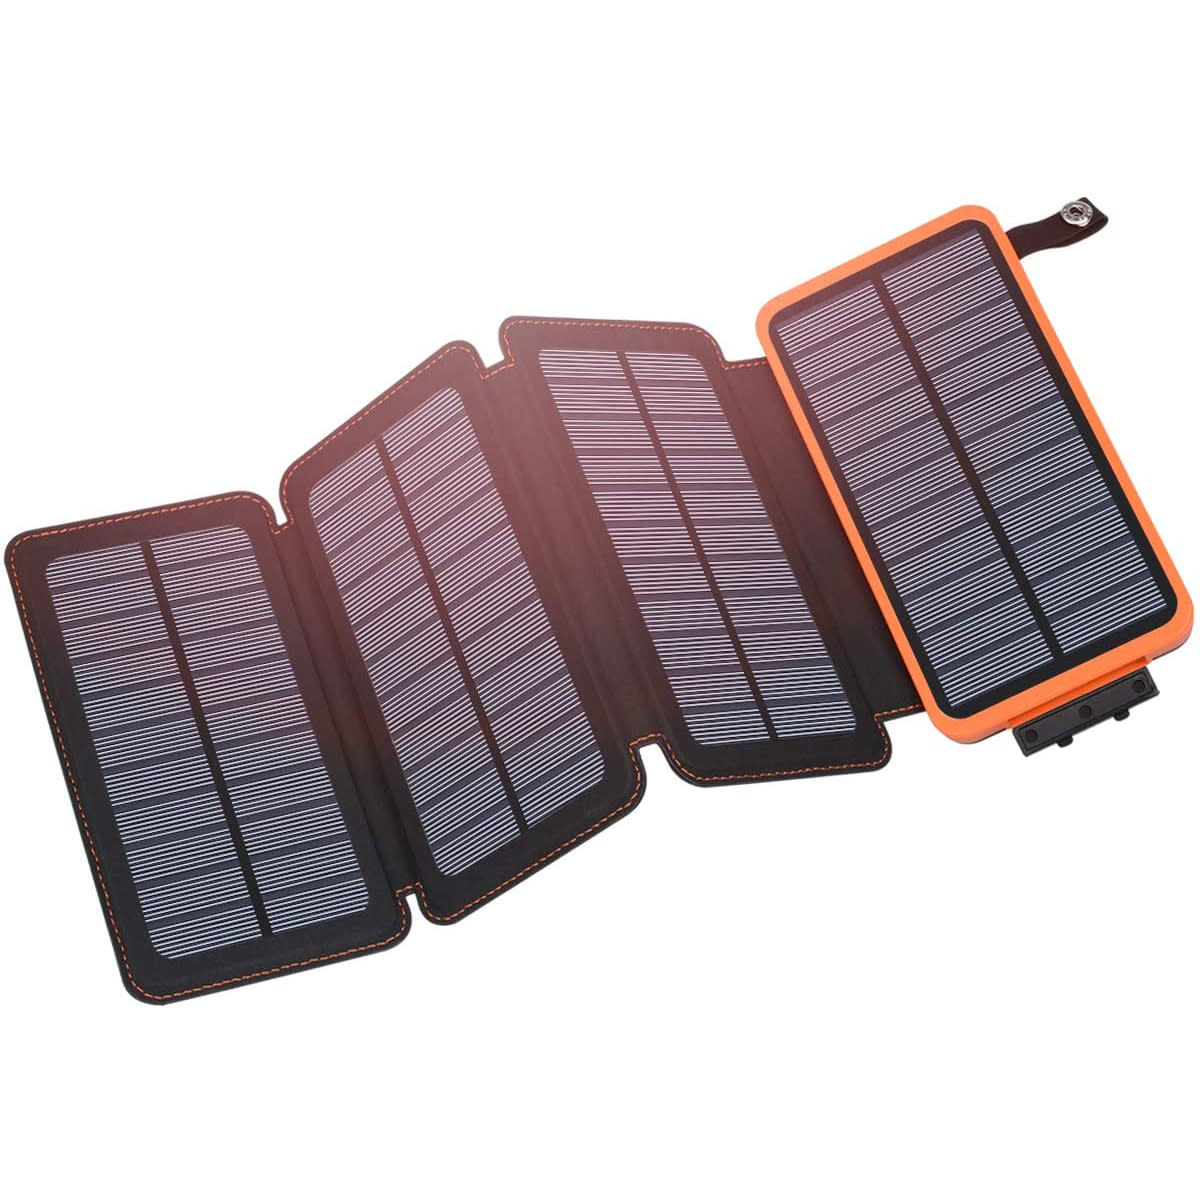 portable solar phone chargers, Hiluckey Solar Charger 25000mAh